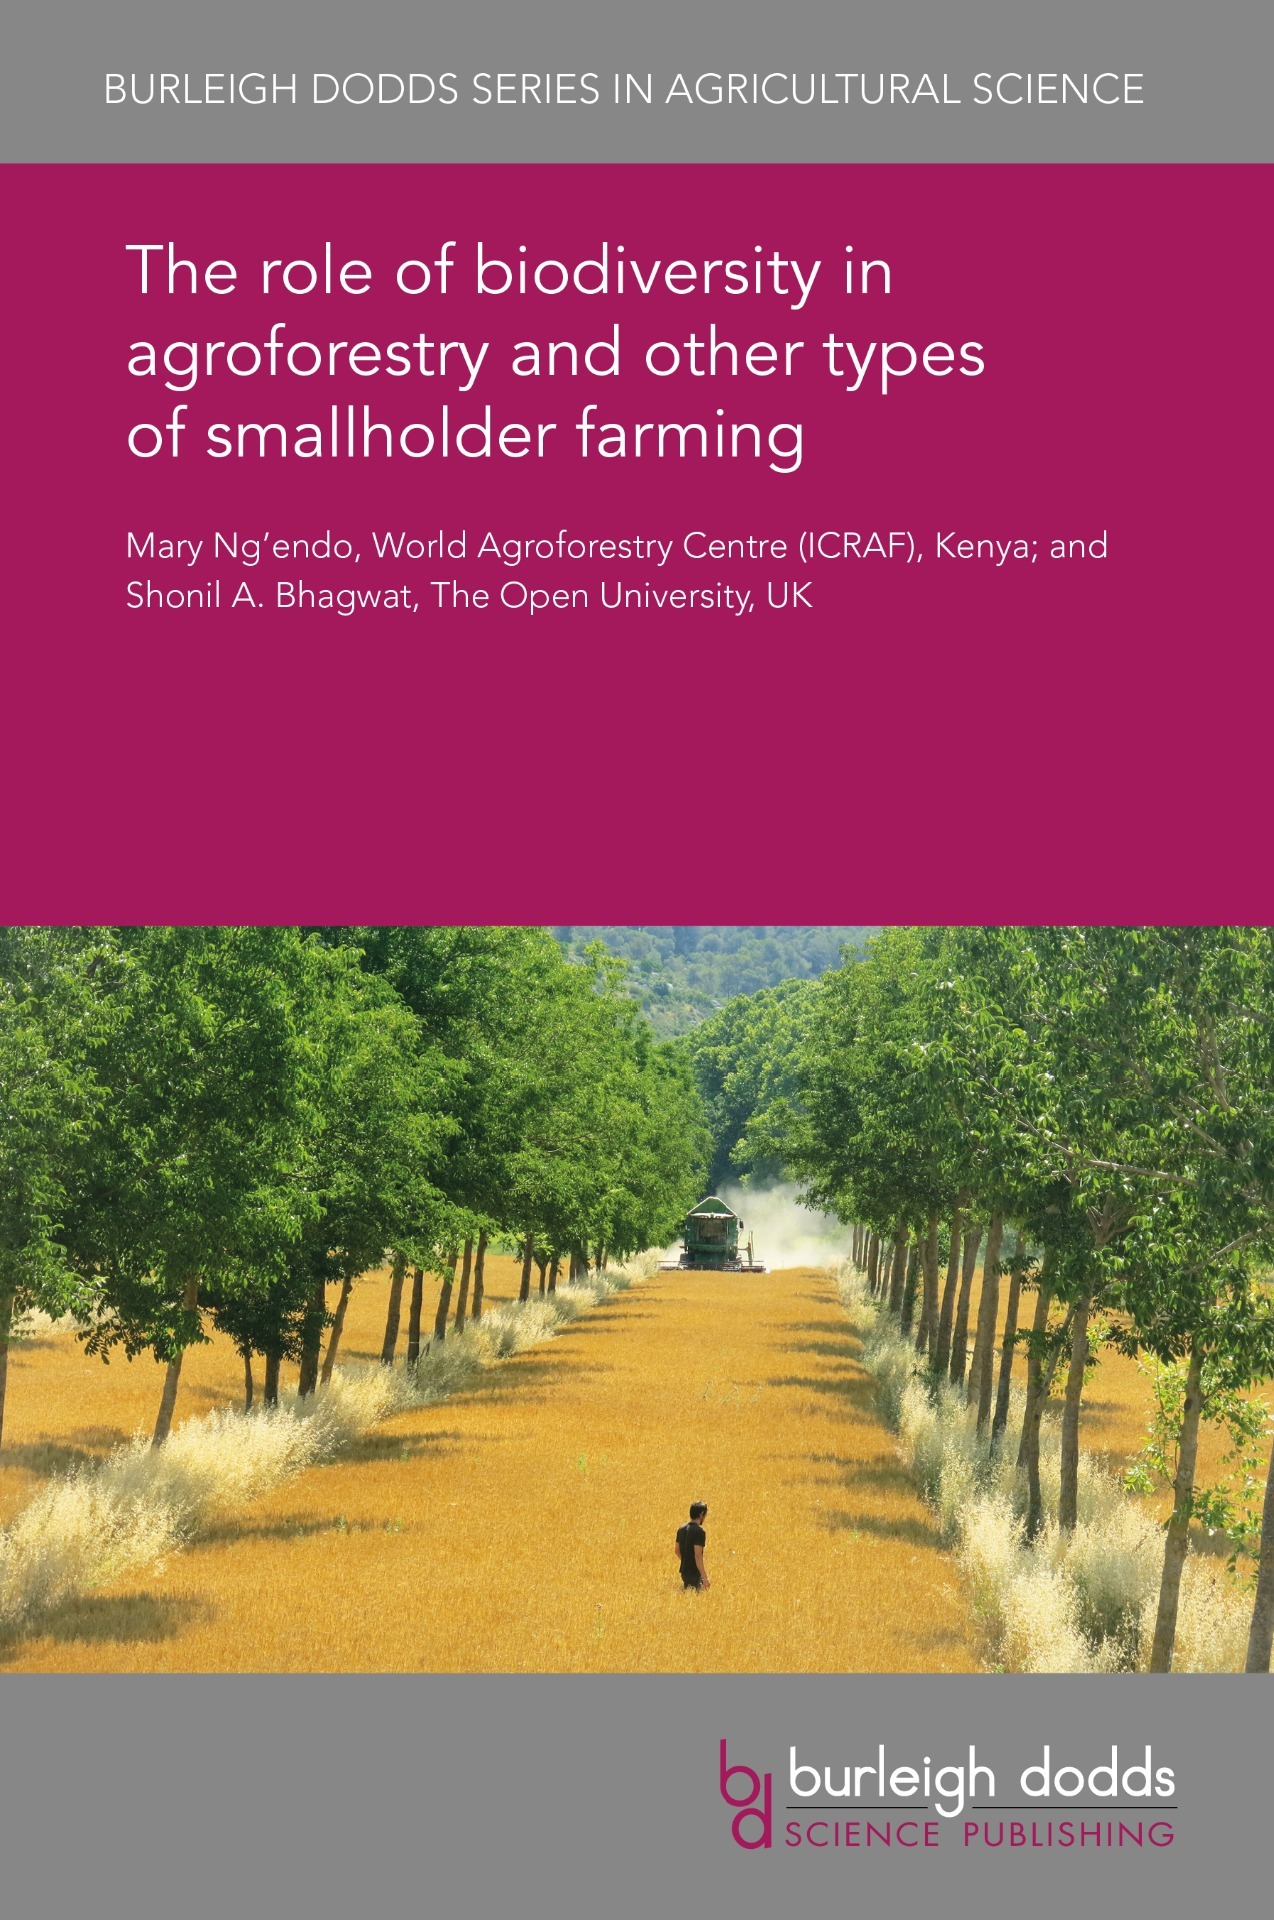 The role of biodiversity in agroforestry and other types of smallholder farming